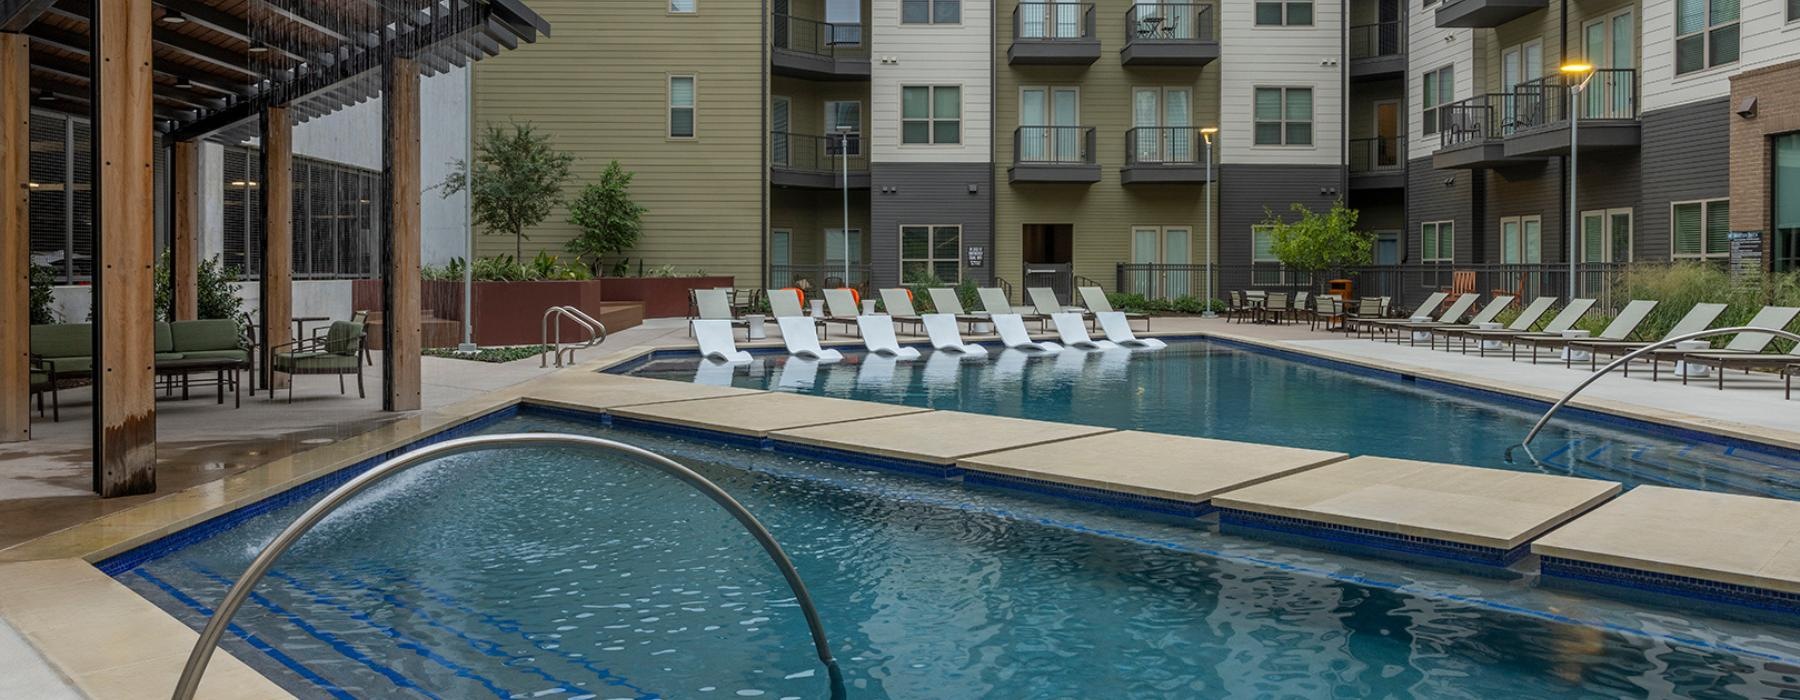 a swimming pool with chairs